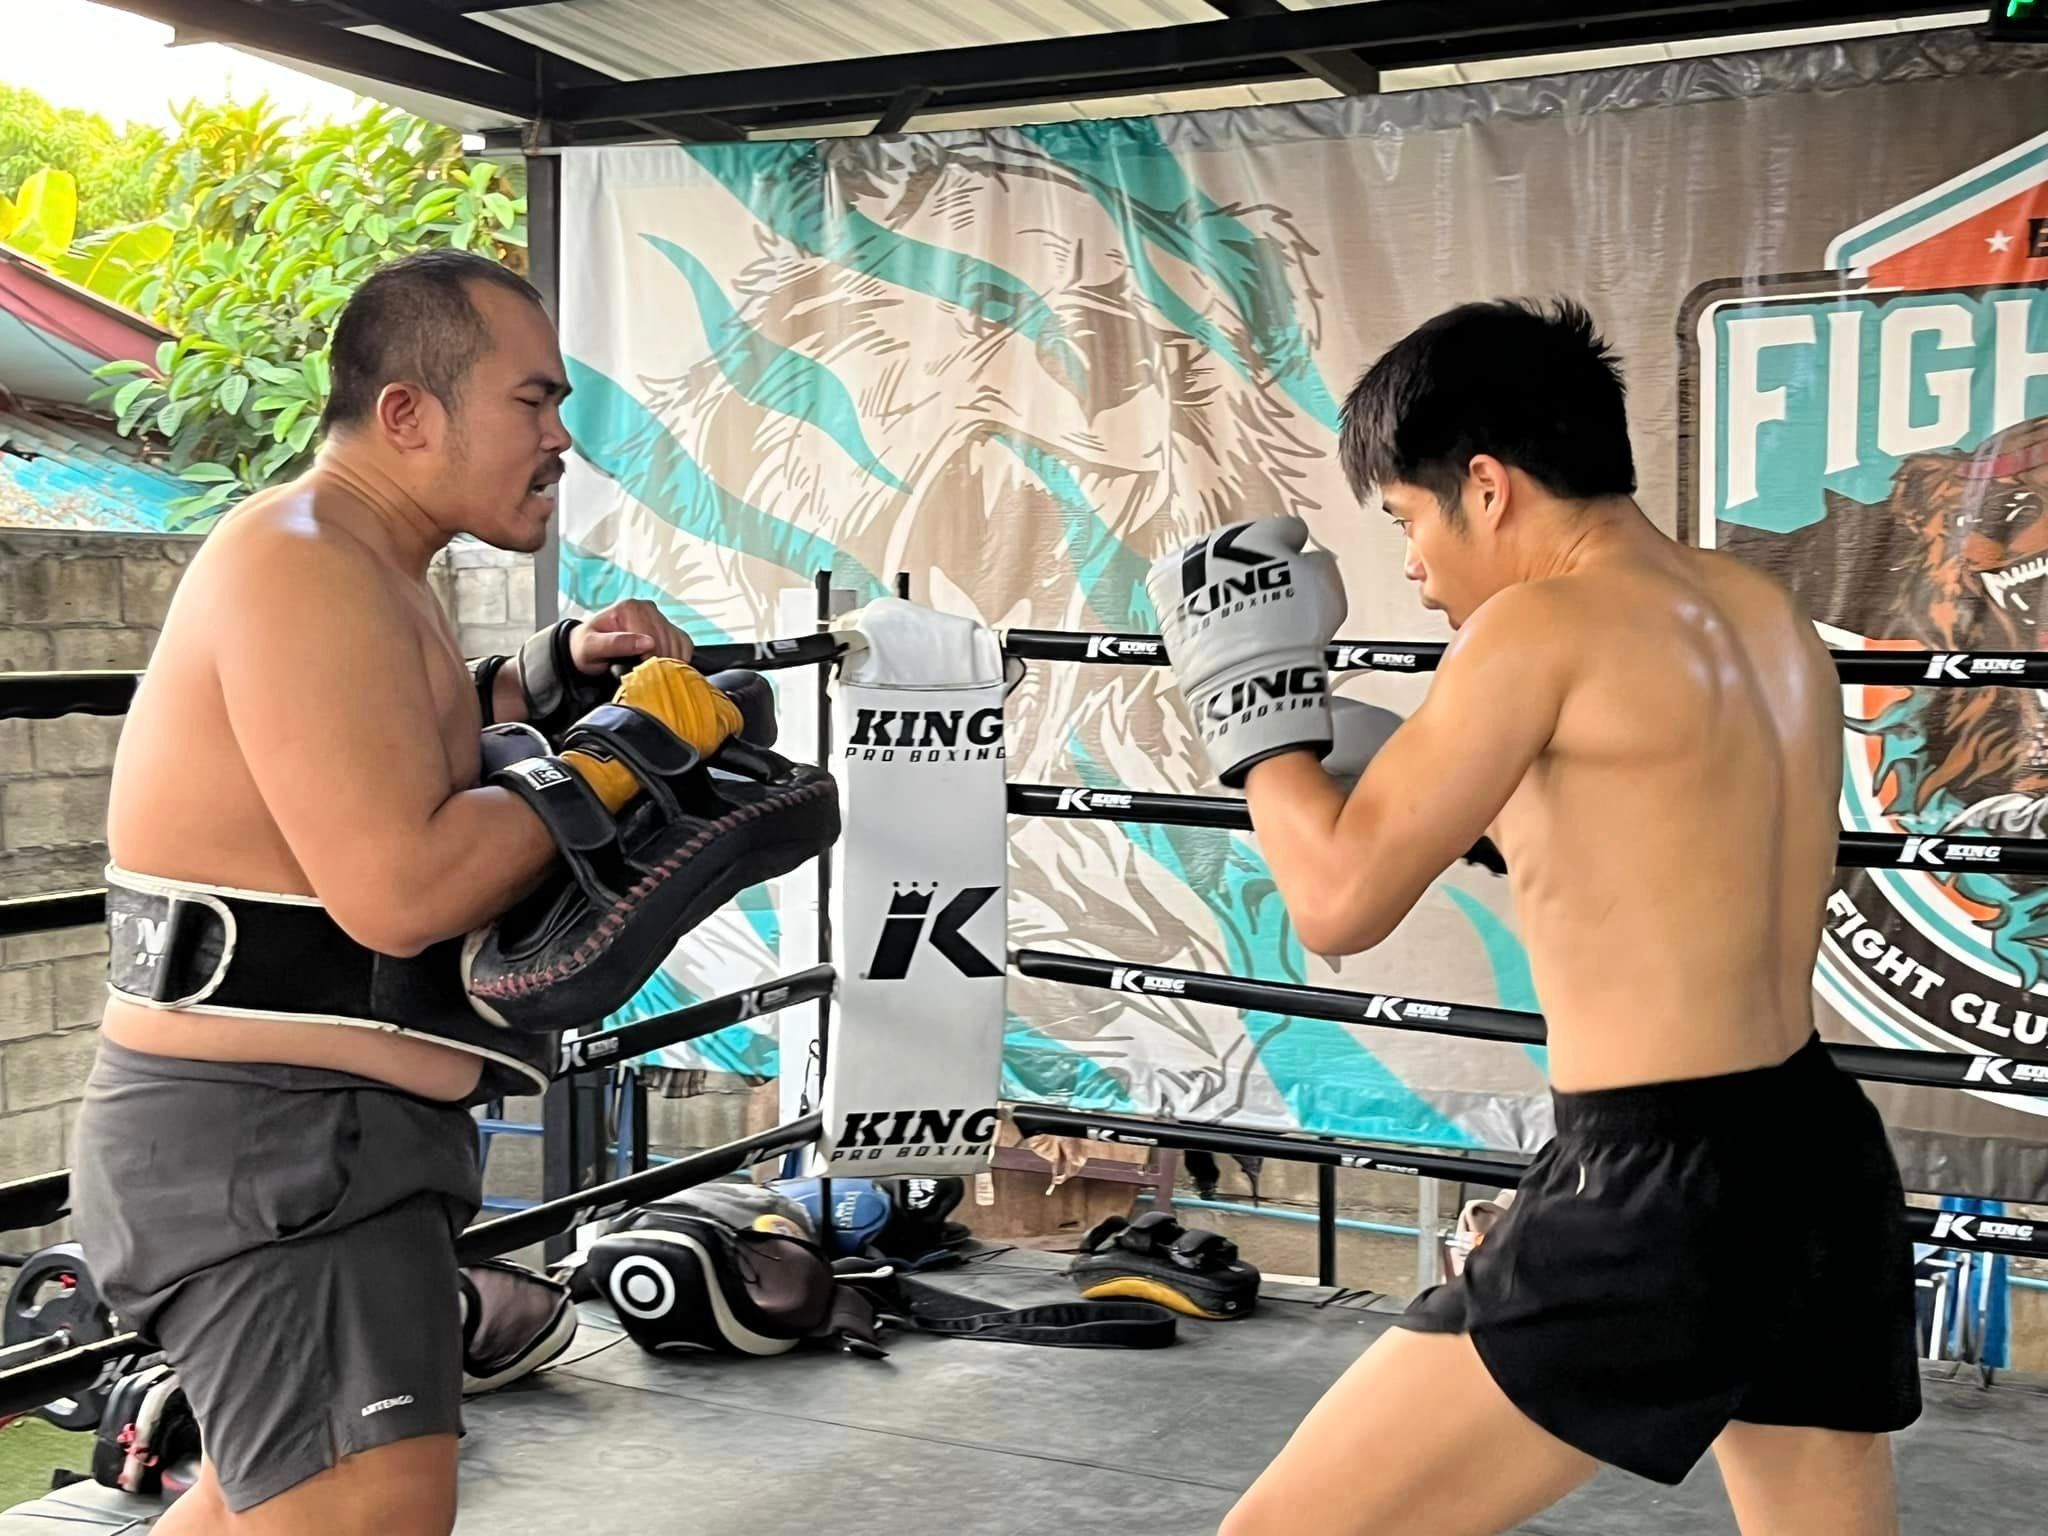 The trainer is coaching a student to strike the pad with punches.